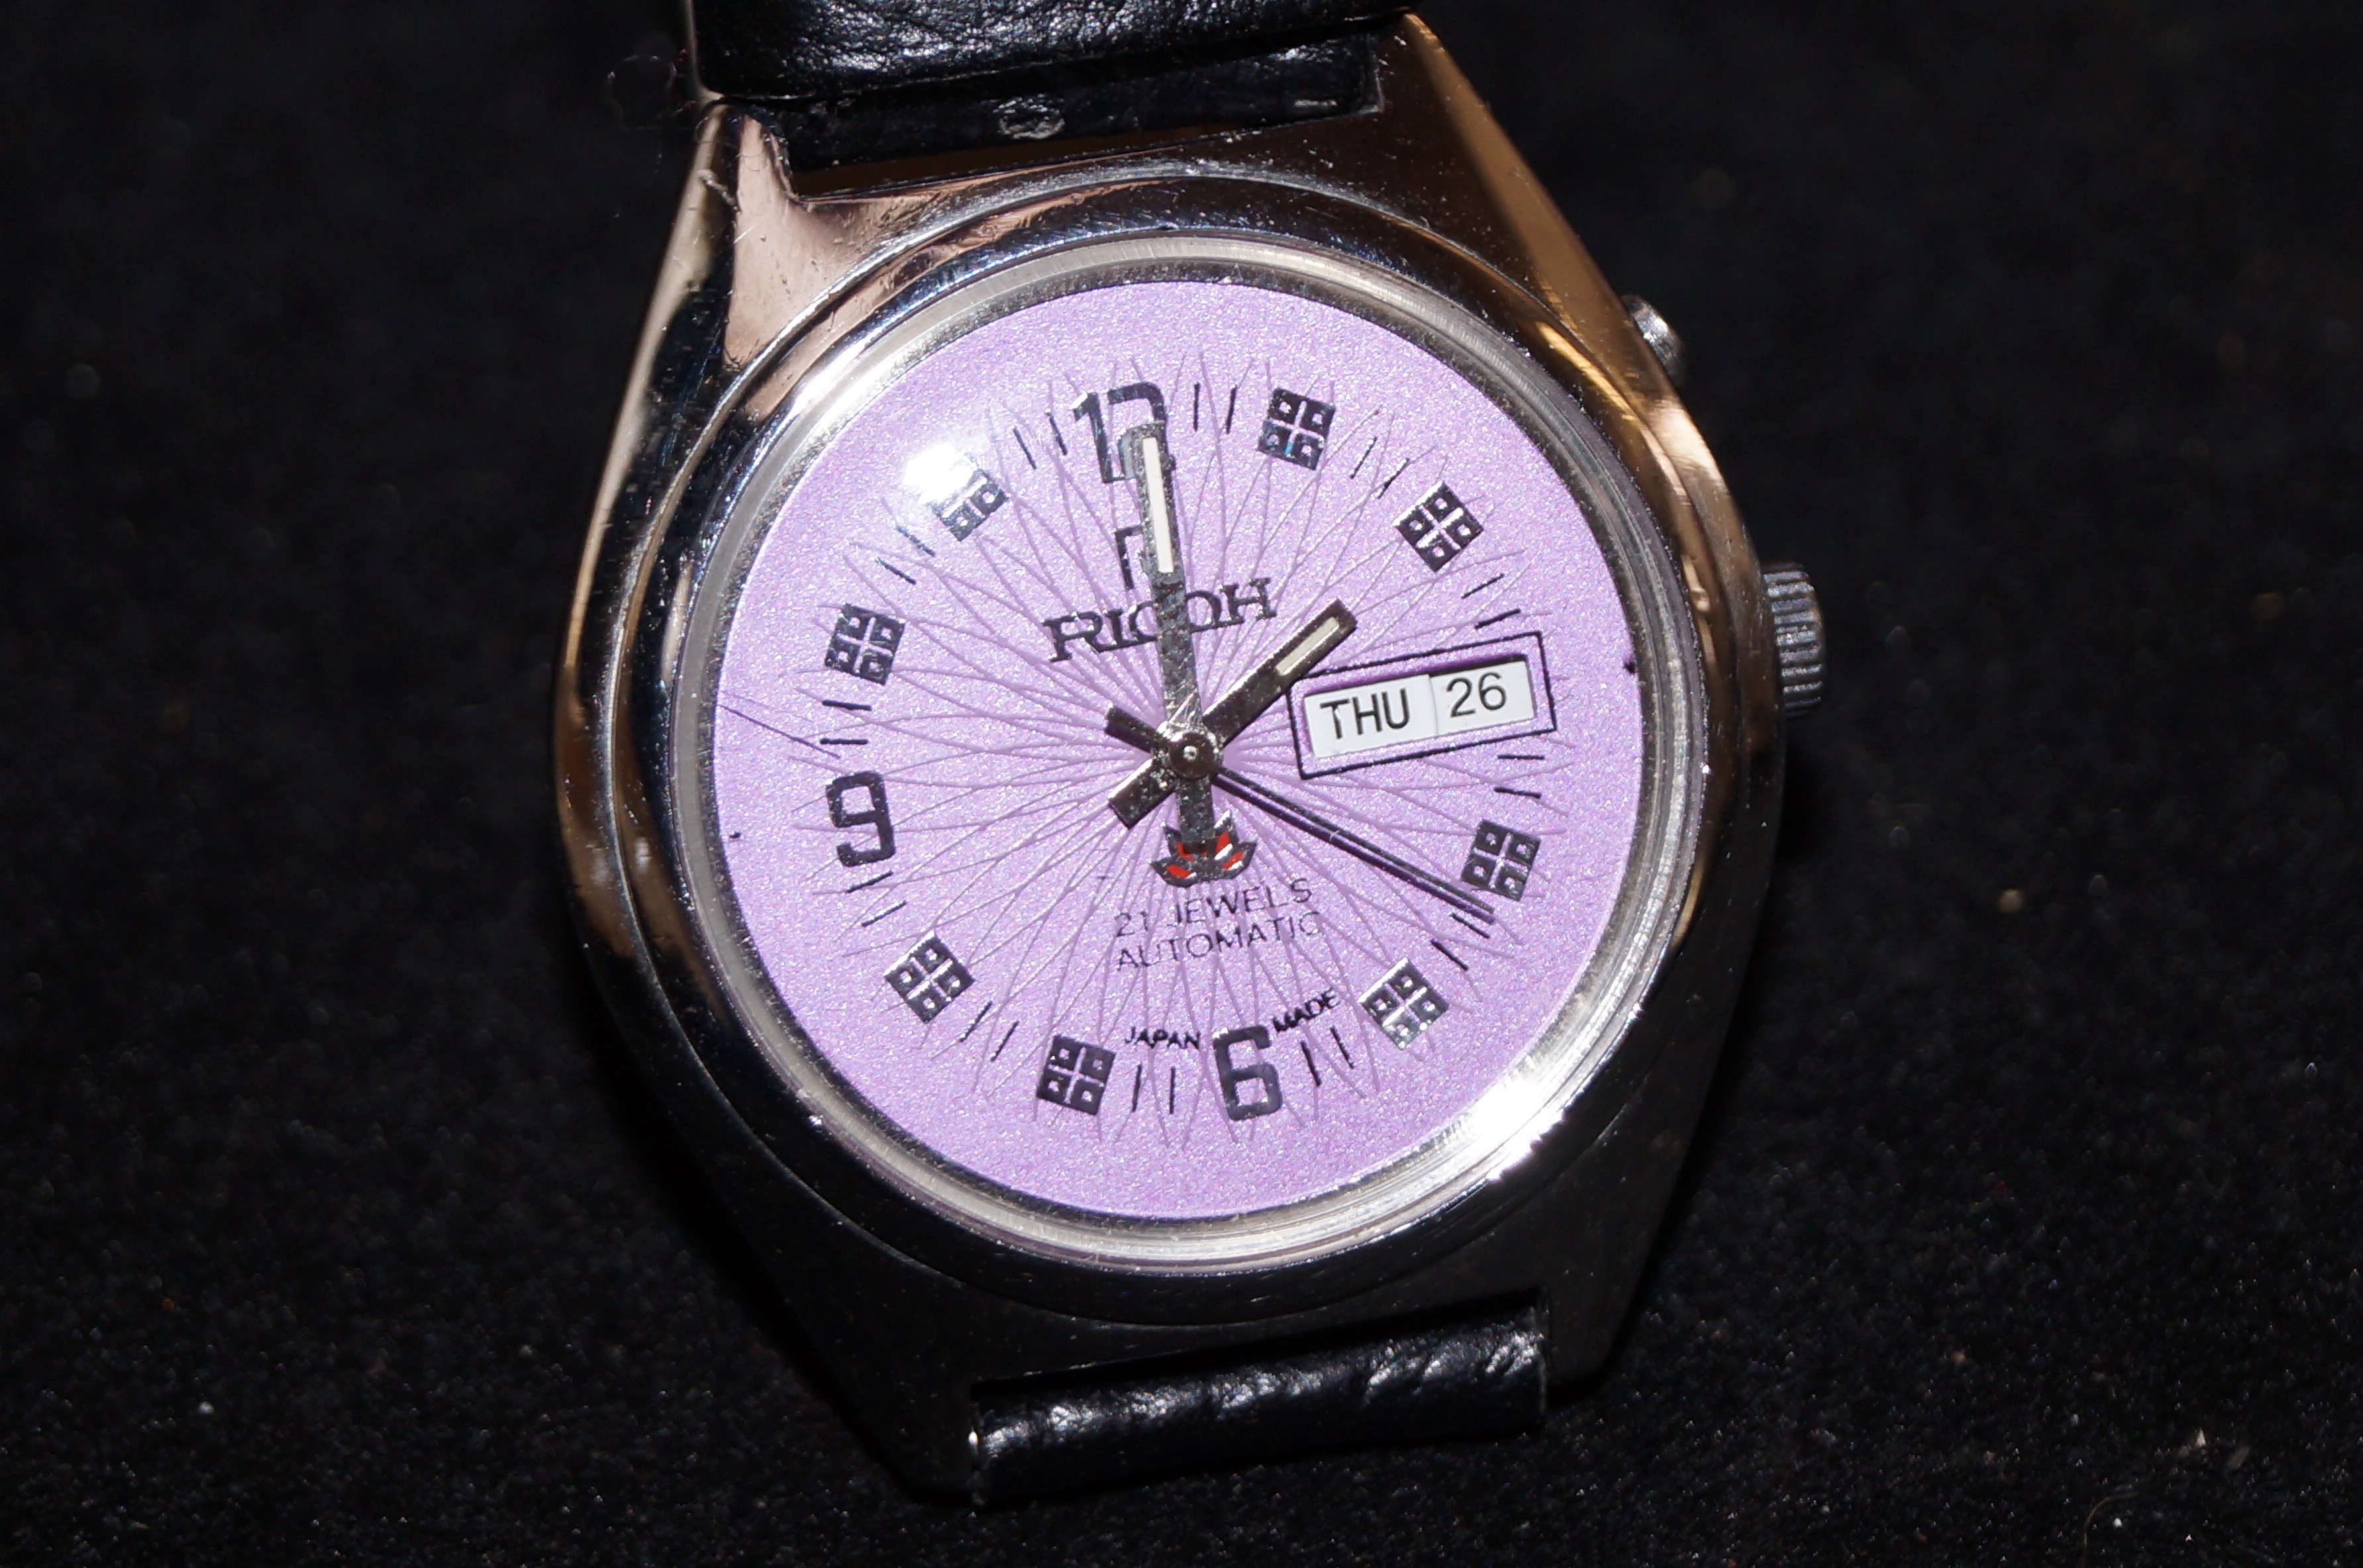 1976 Ricoh wristwatch with purple dial day/date